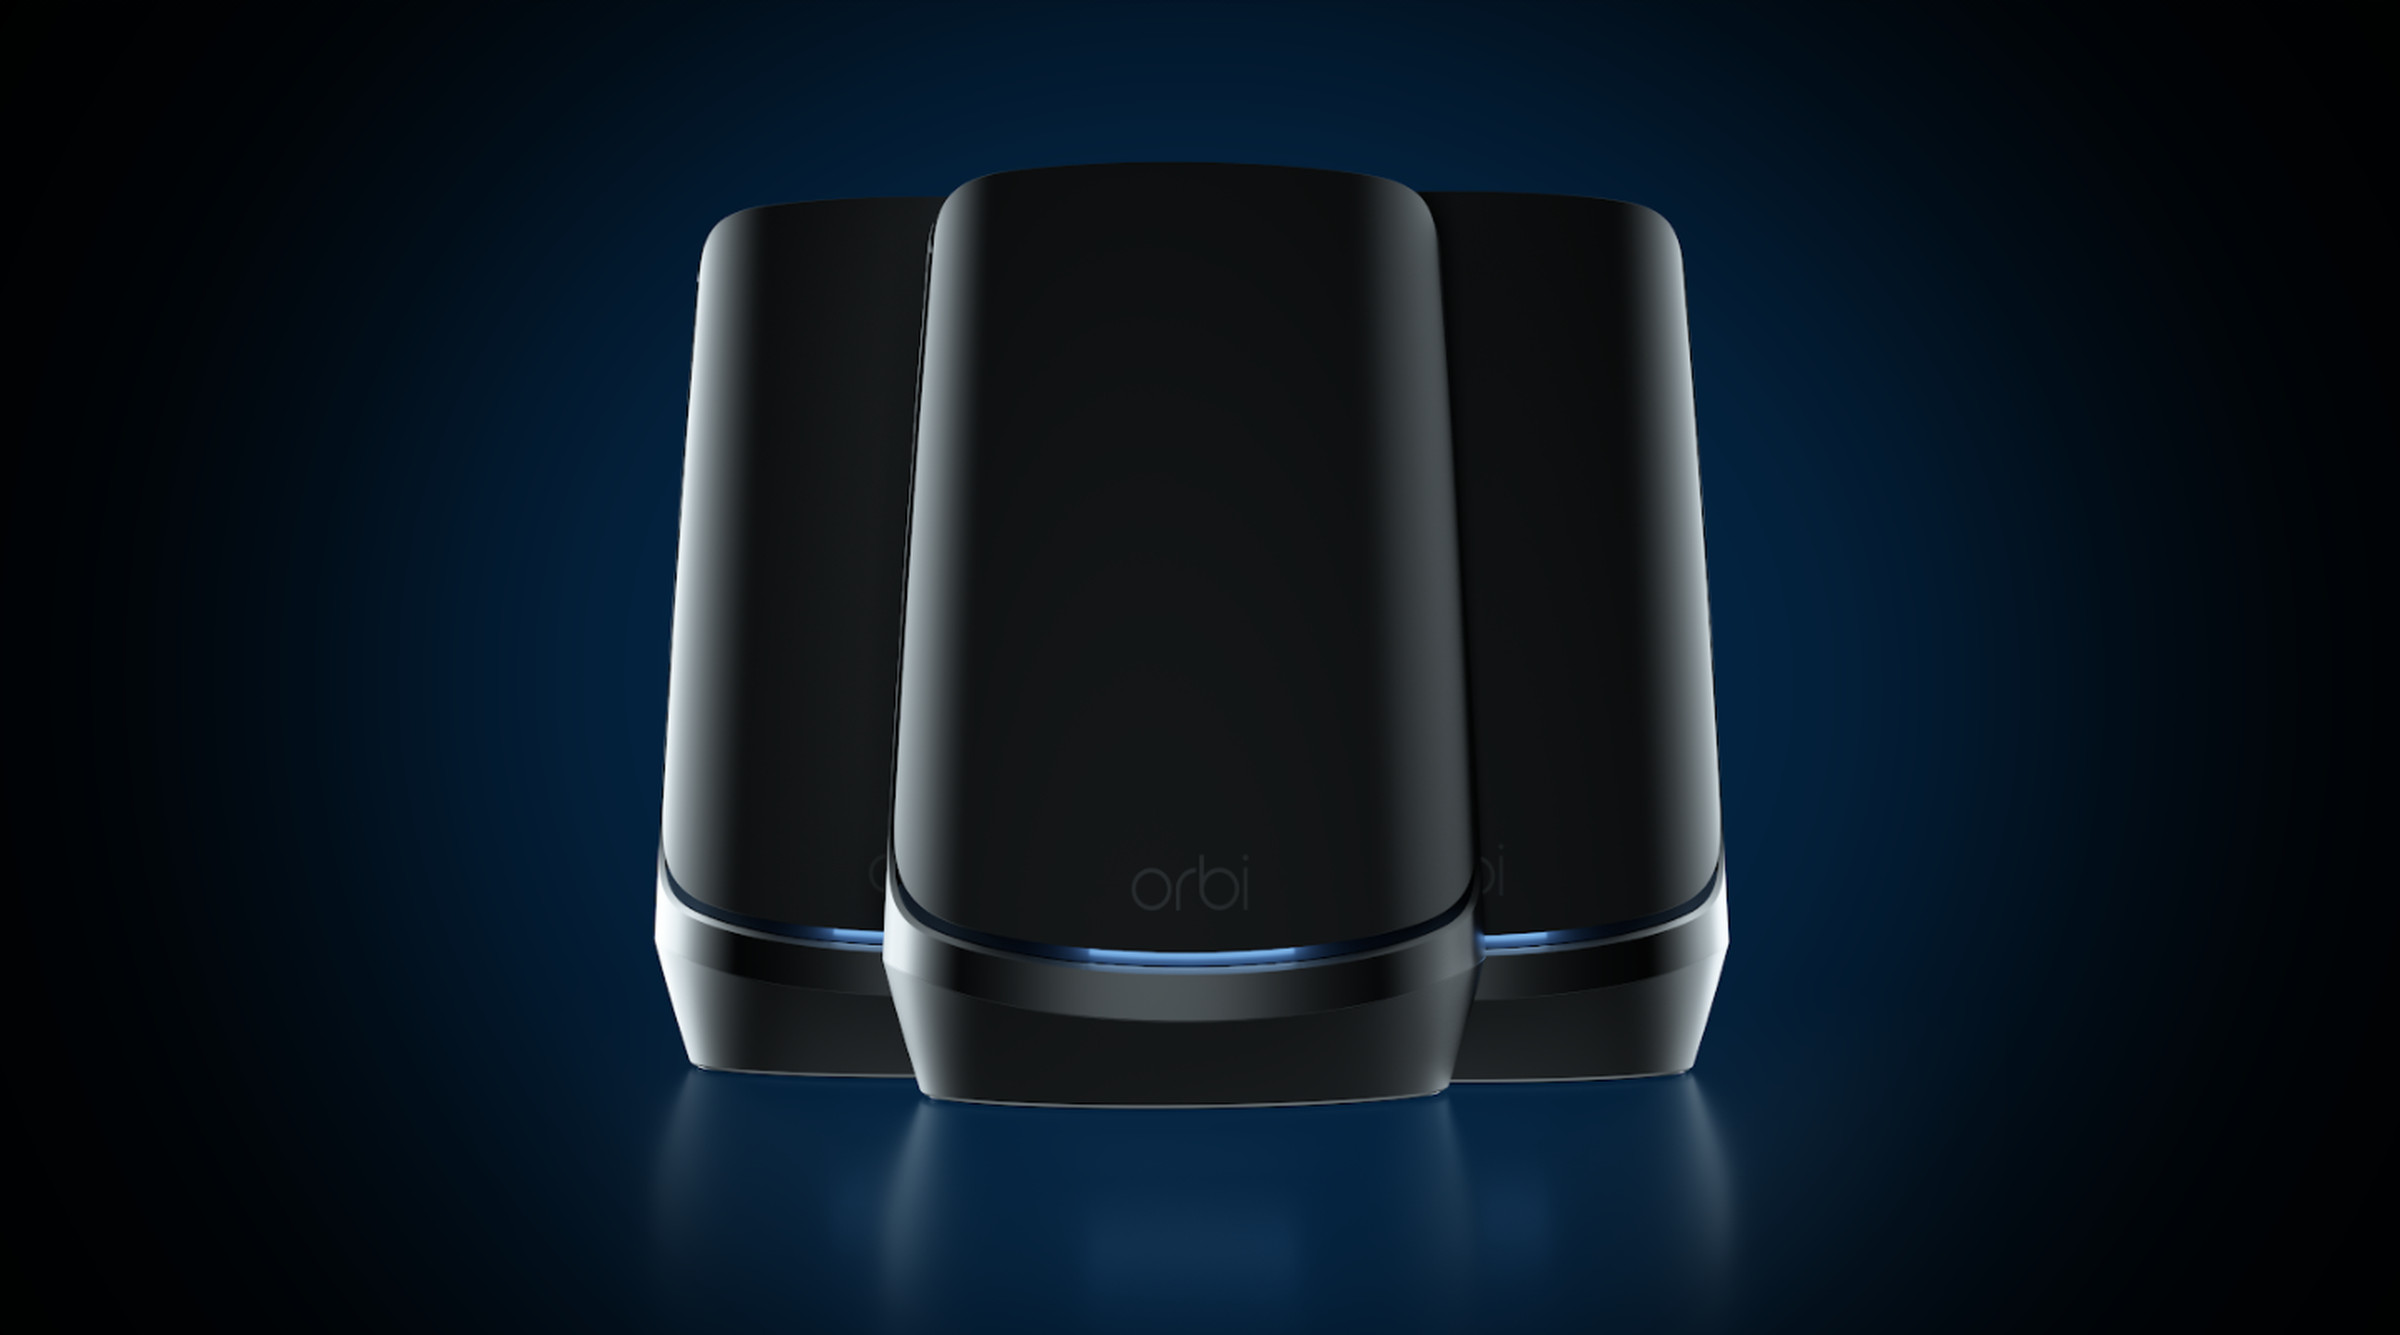 A limited-edition black version of the Orbi quad-band Wi-Fi 6E router will not cost more.